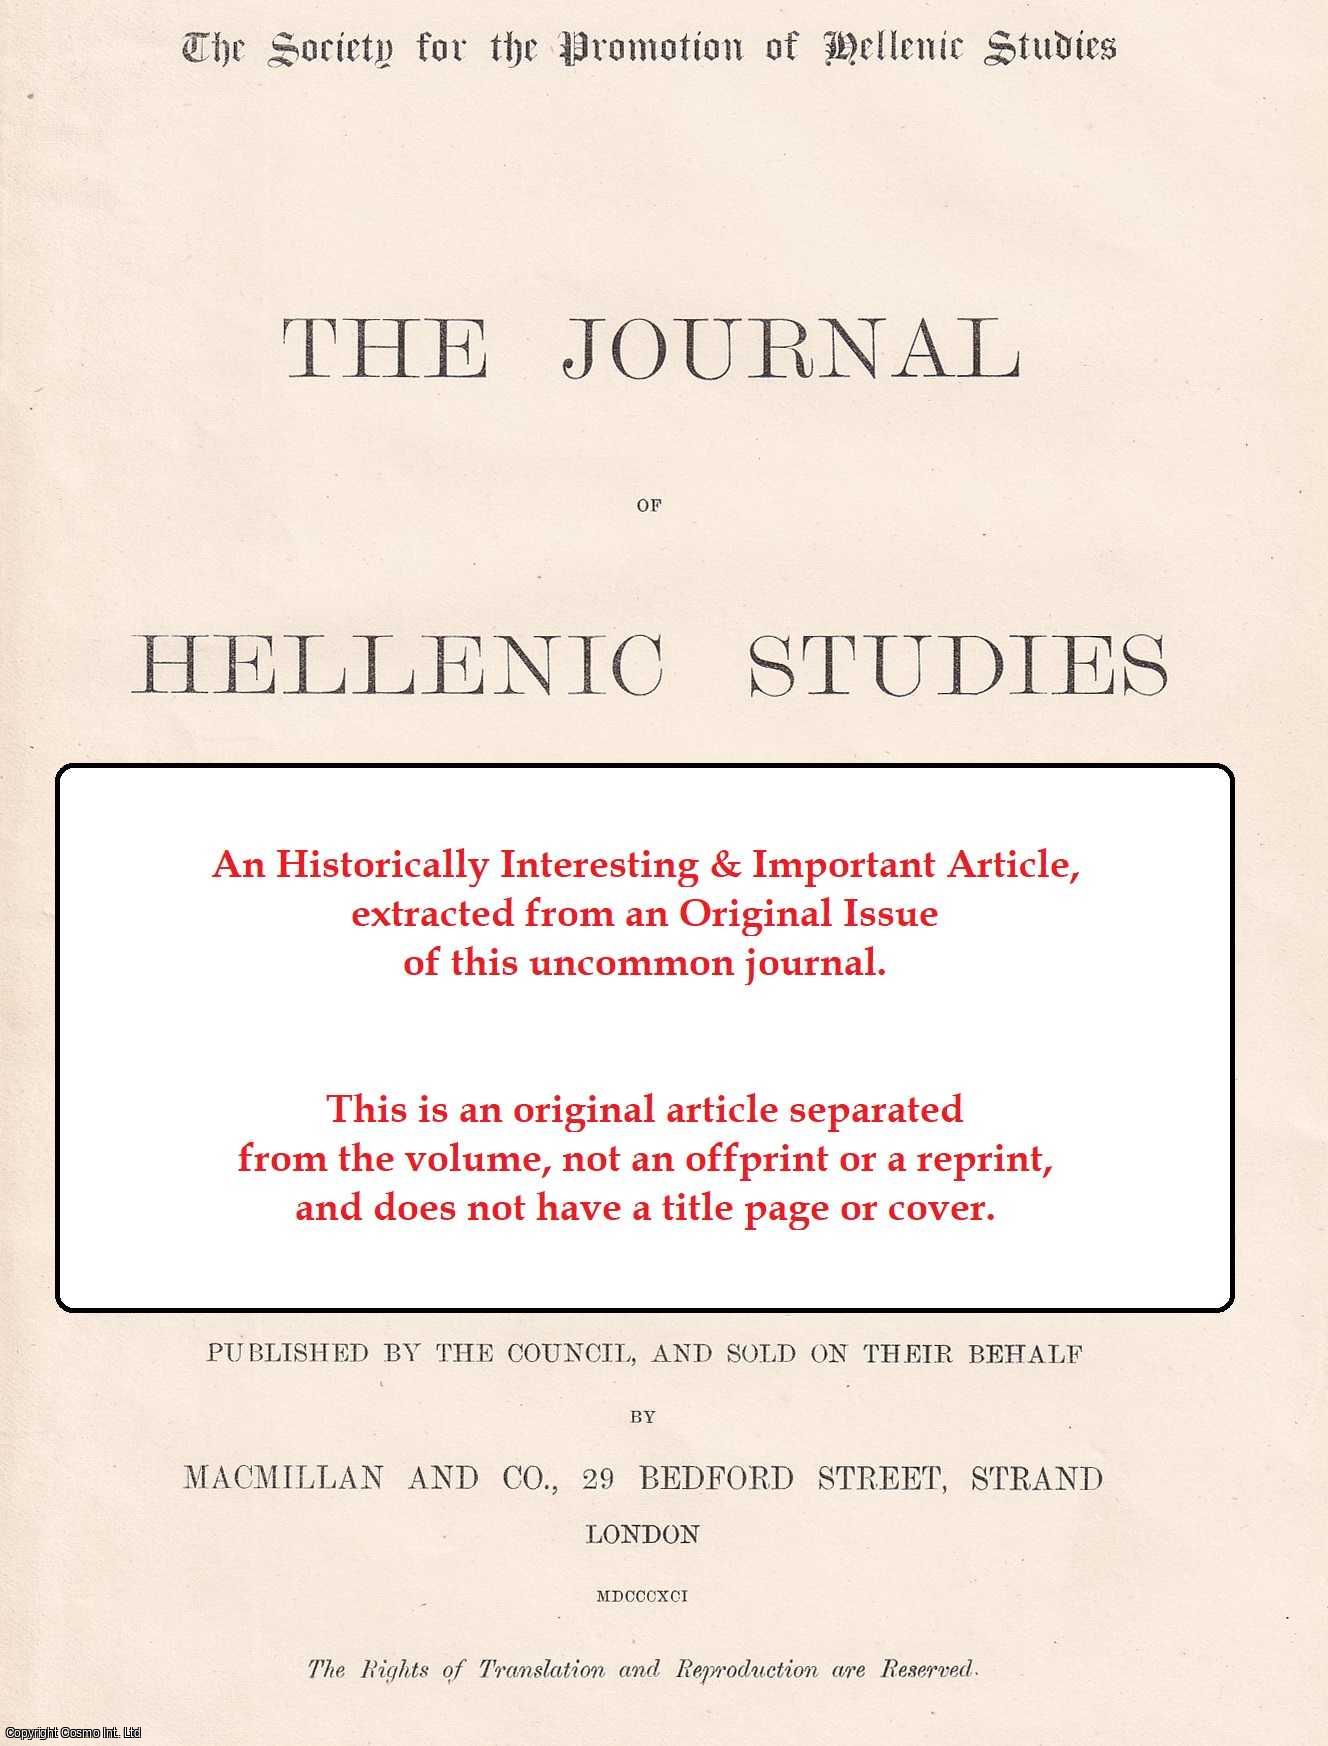 Henry Stuart Jones - The Chest of Kypselos. An uncommon original article from the journal of Hellenic studies, 1894.